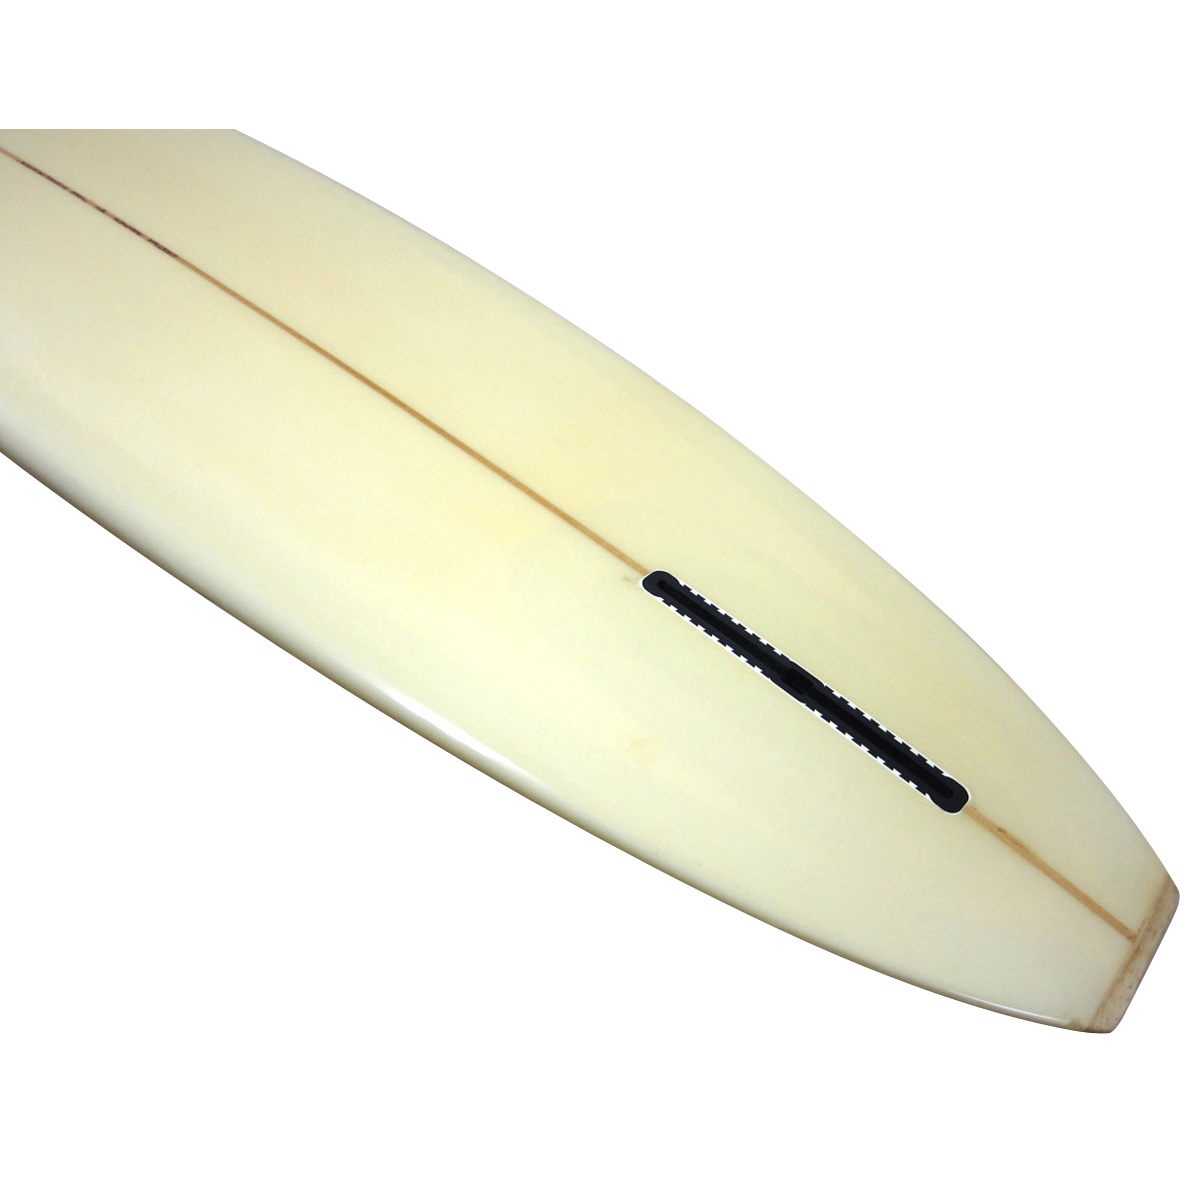 Surfboards Hawaii / 9'1 Glider Shaped by Mike Diffenderfer 